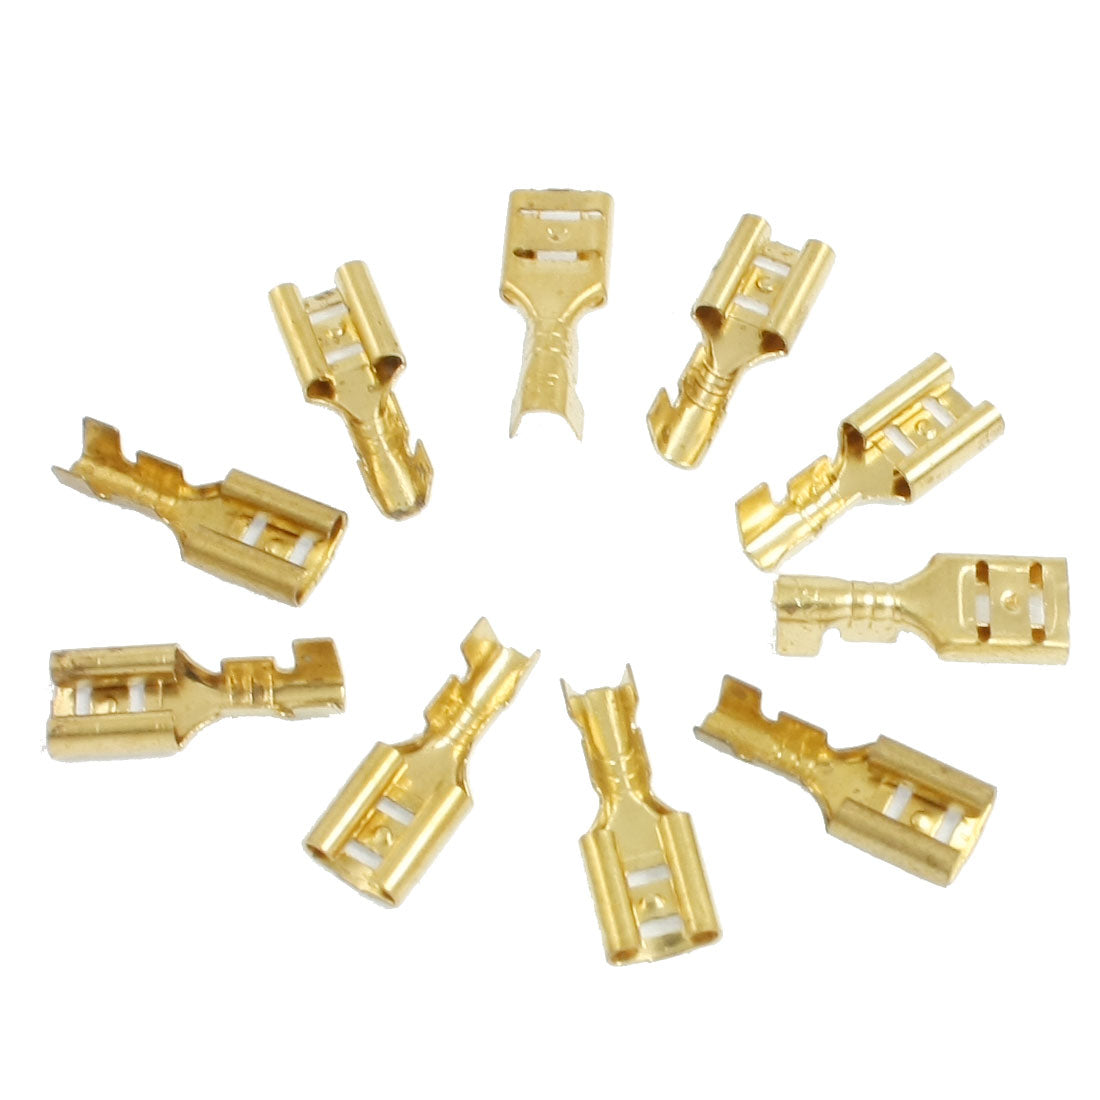 uxcell Uxcell Boat Speaker 6.5mm Female Spade Terminal Wire Connector 10 Pcs